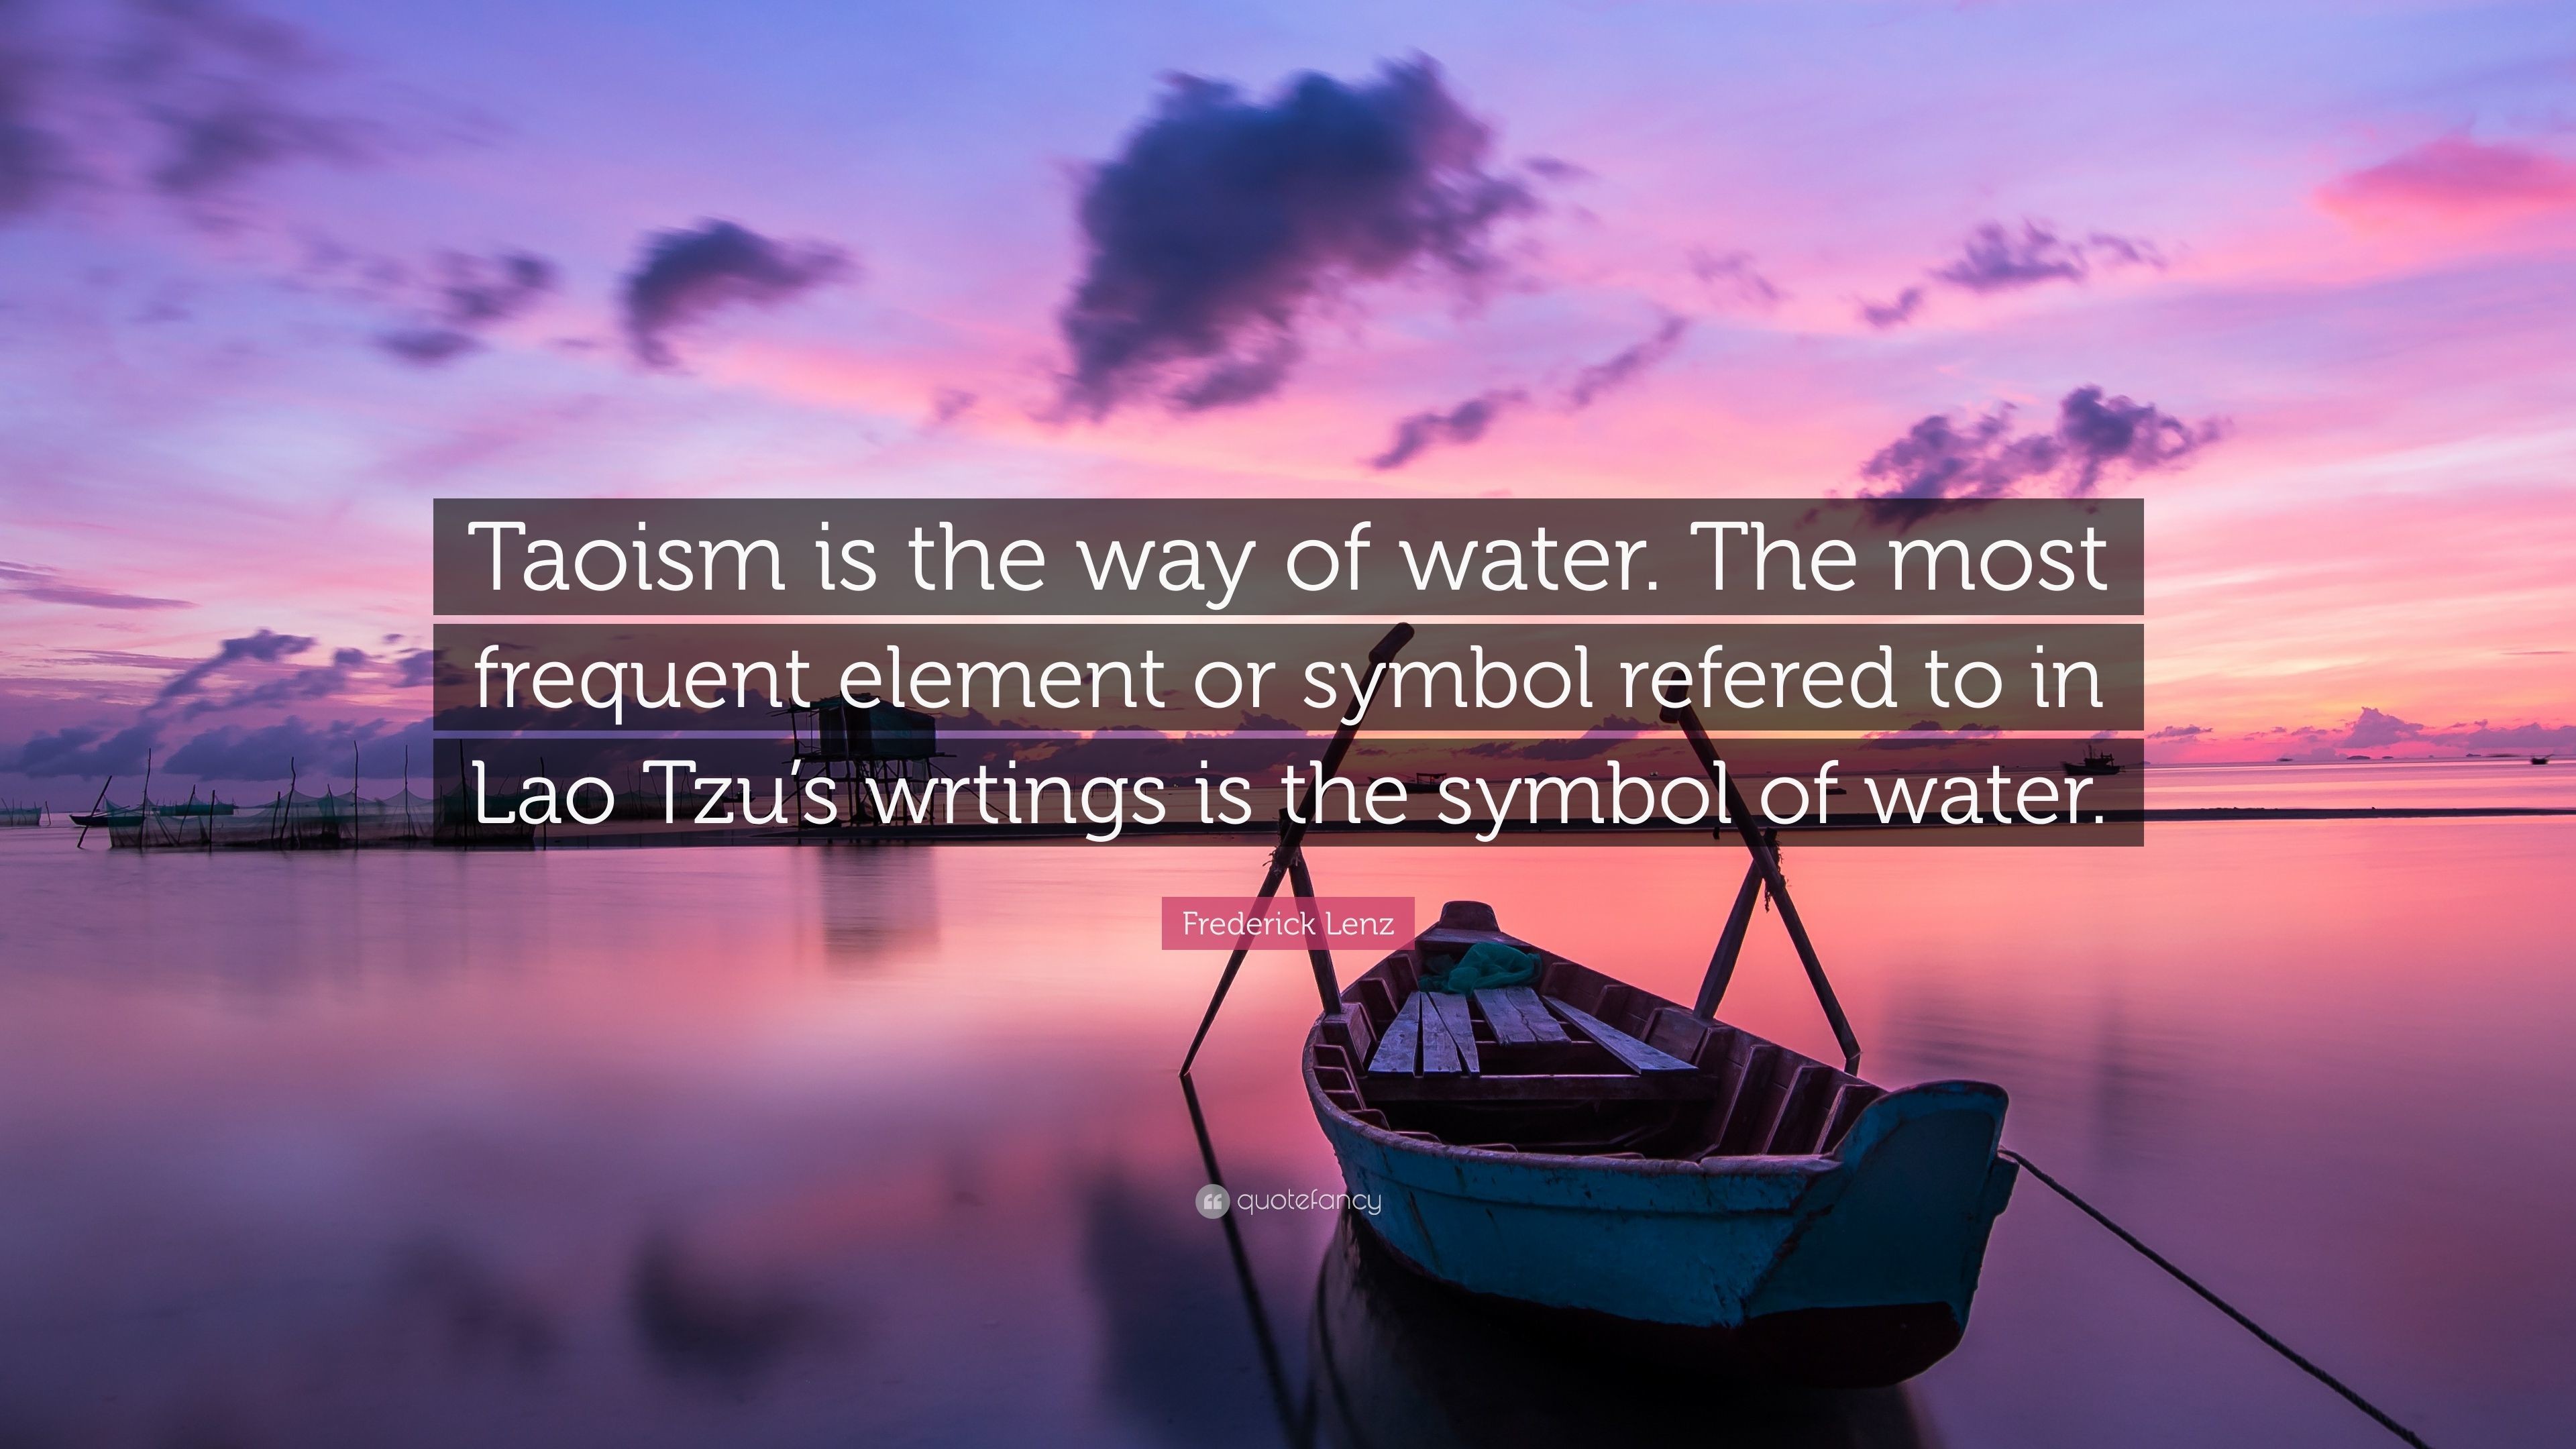 3840x2160 Frederick Lenz Quote: “Taoism is the way of water. The most frequent element